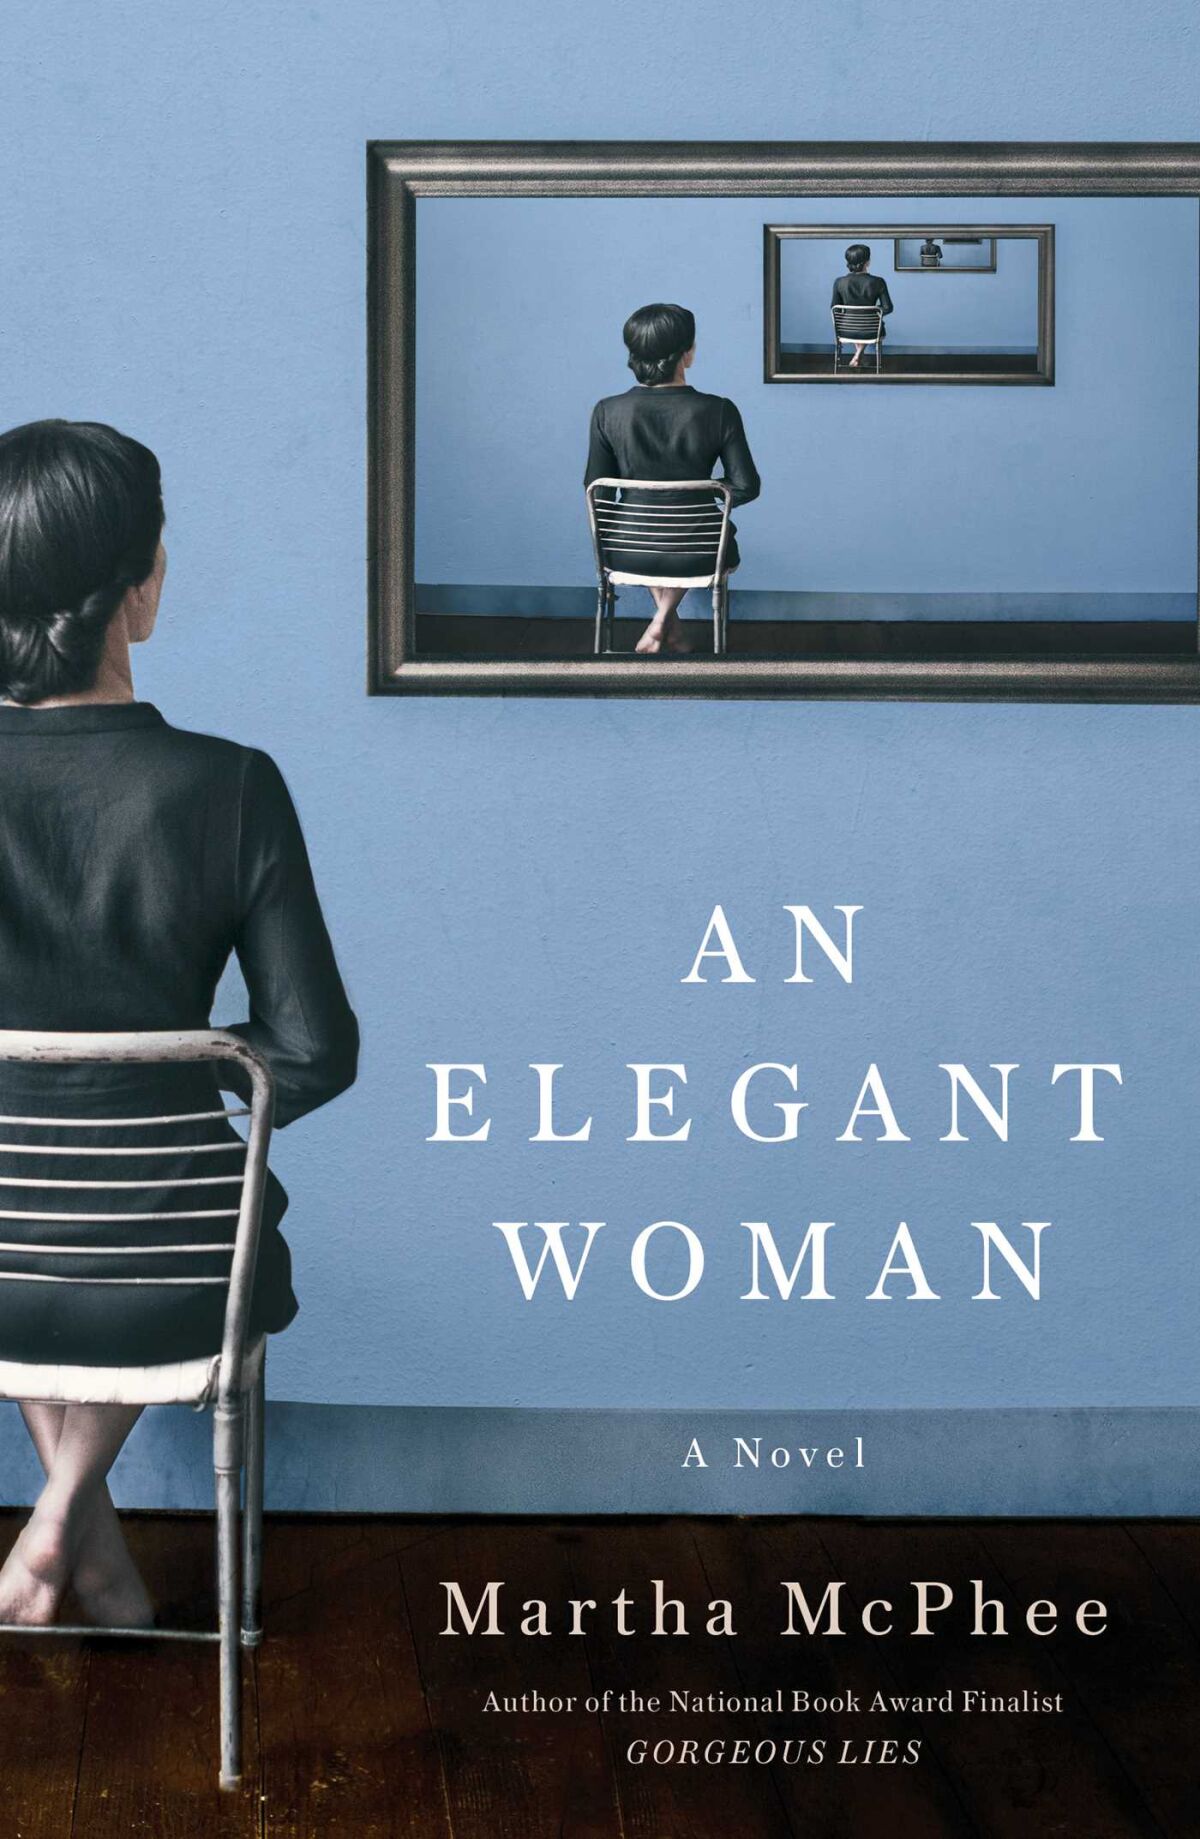 A book jacket for "An Elegant Woman."